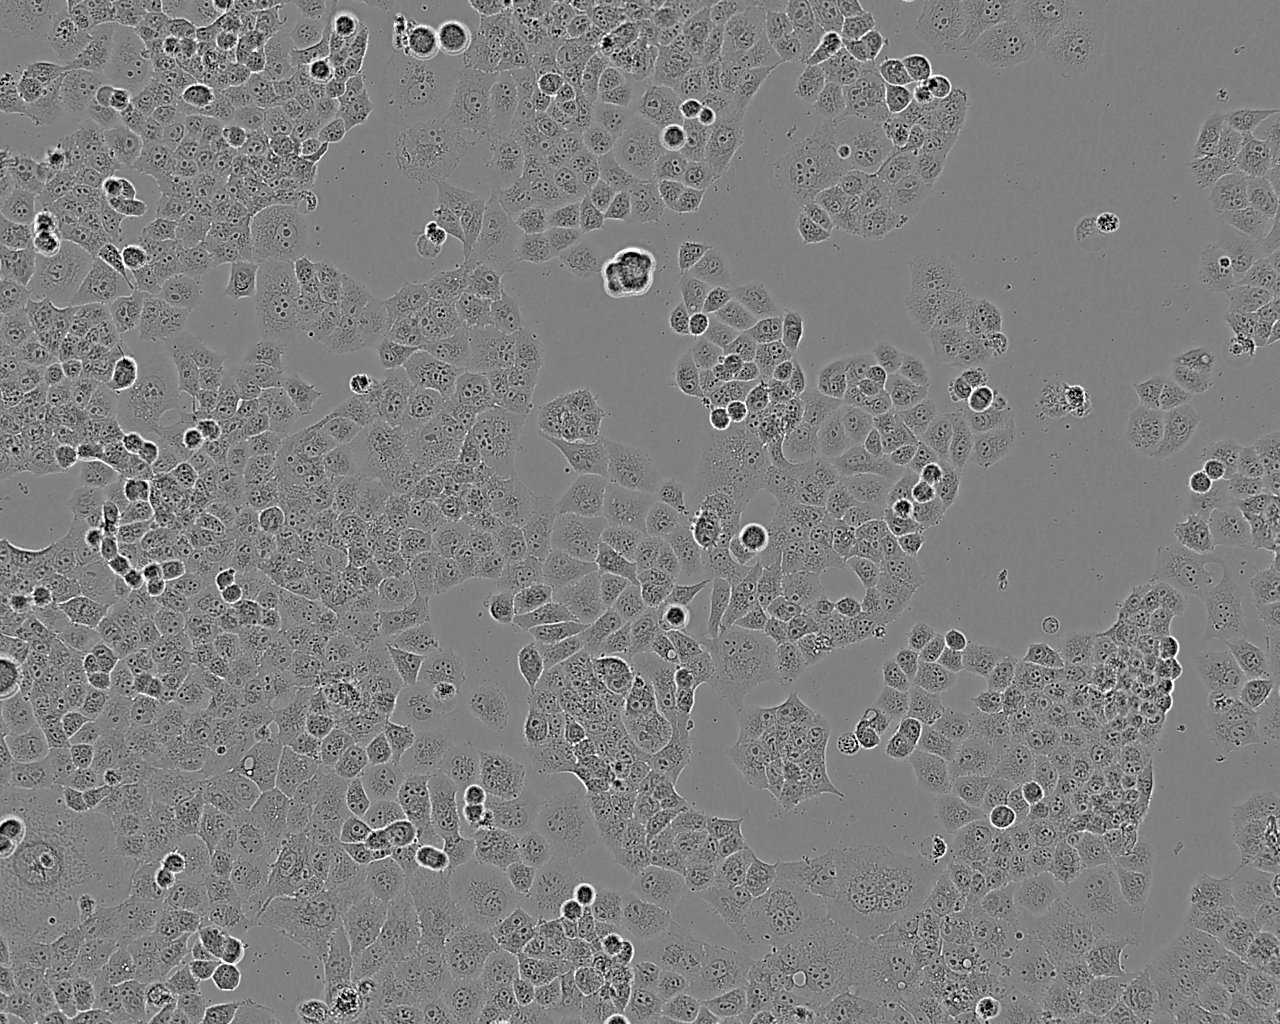 BAC1.2F5 Cell